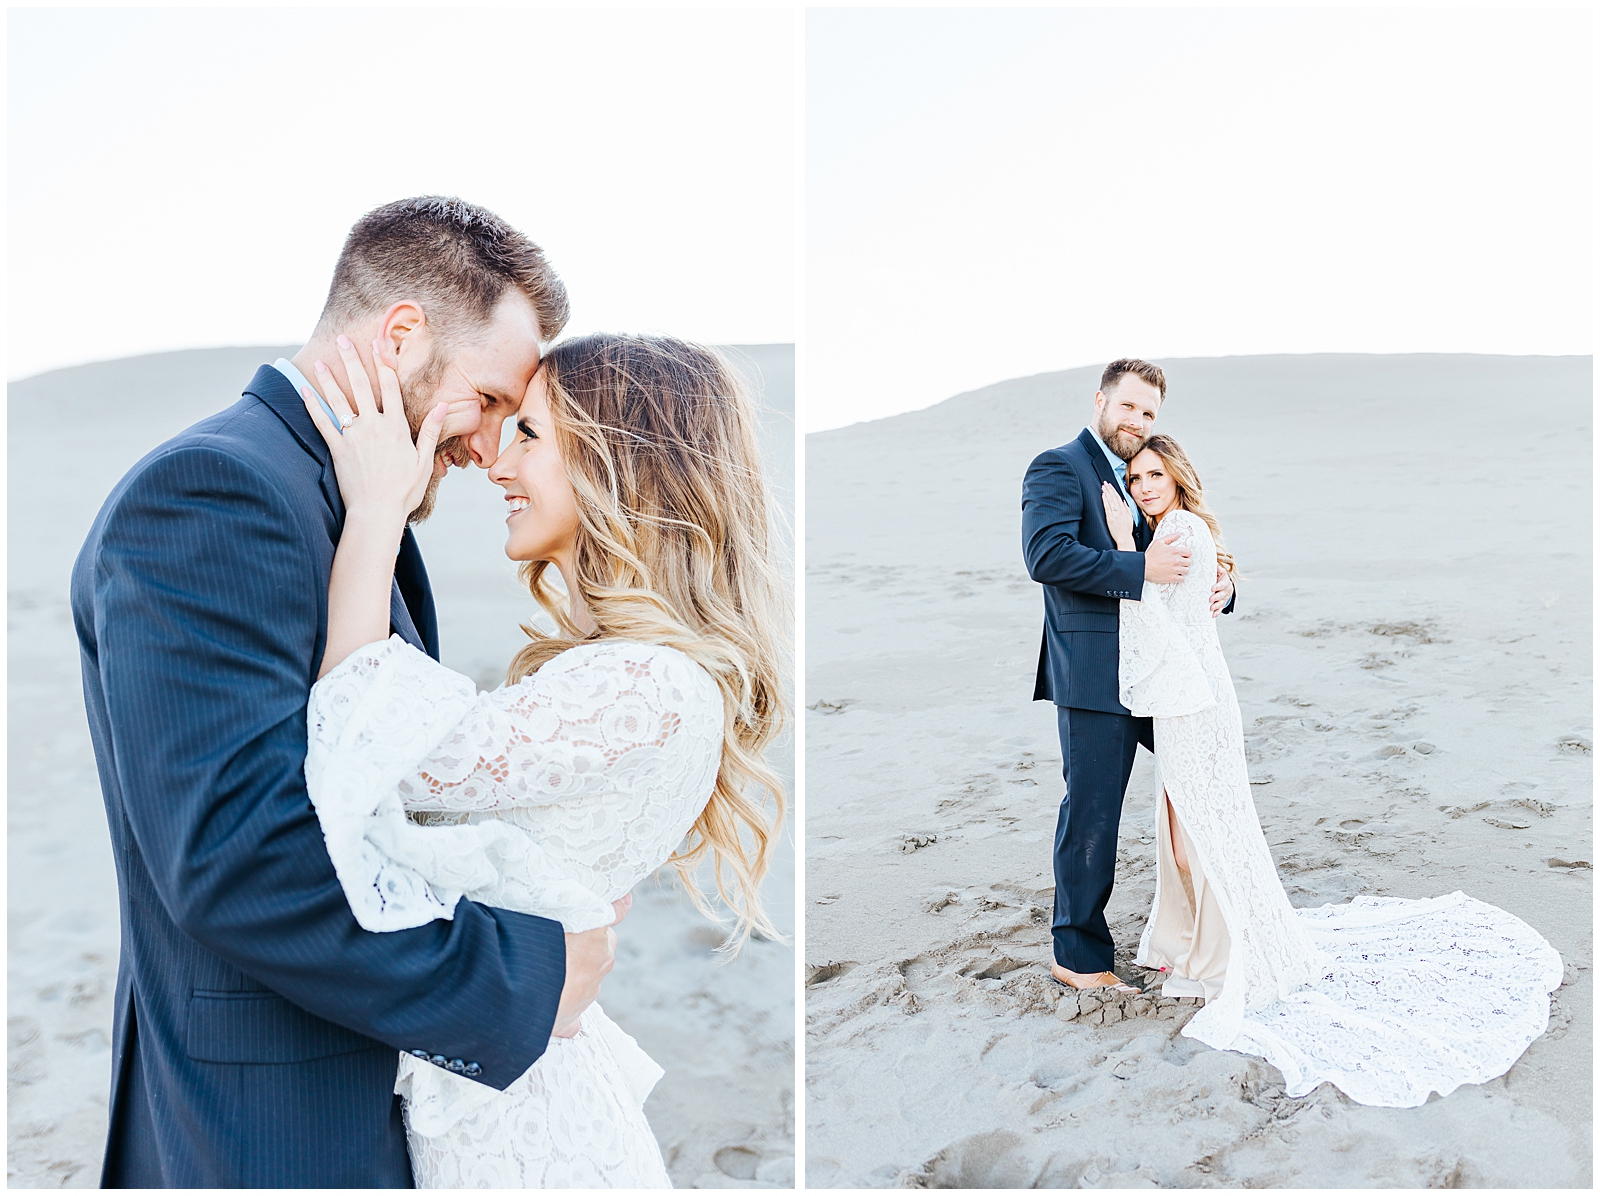 Dreamy Light and Airy Engagement Photos in White Dress and Navy Suit at the Sand Dunes